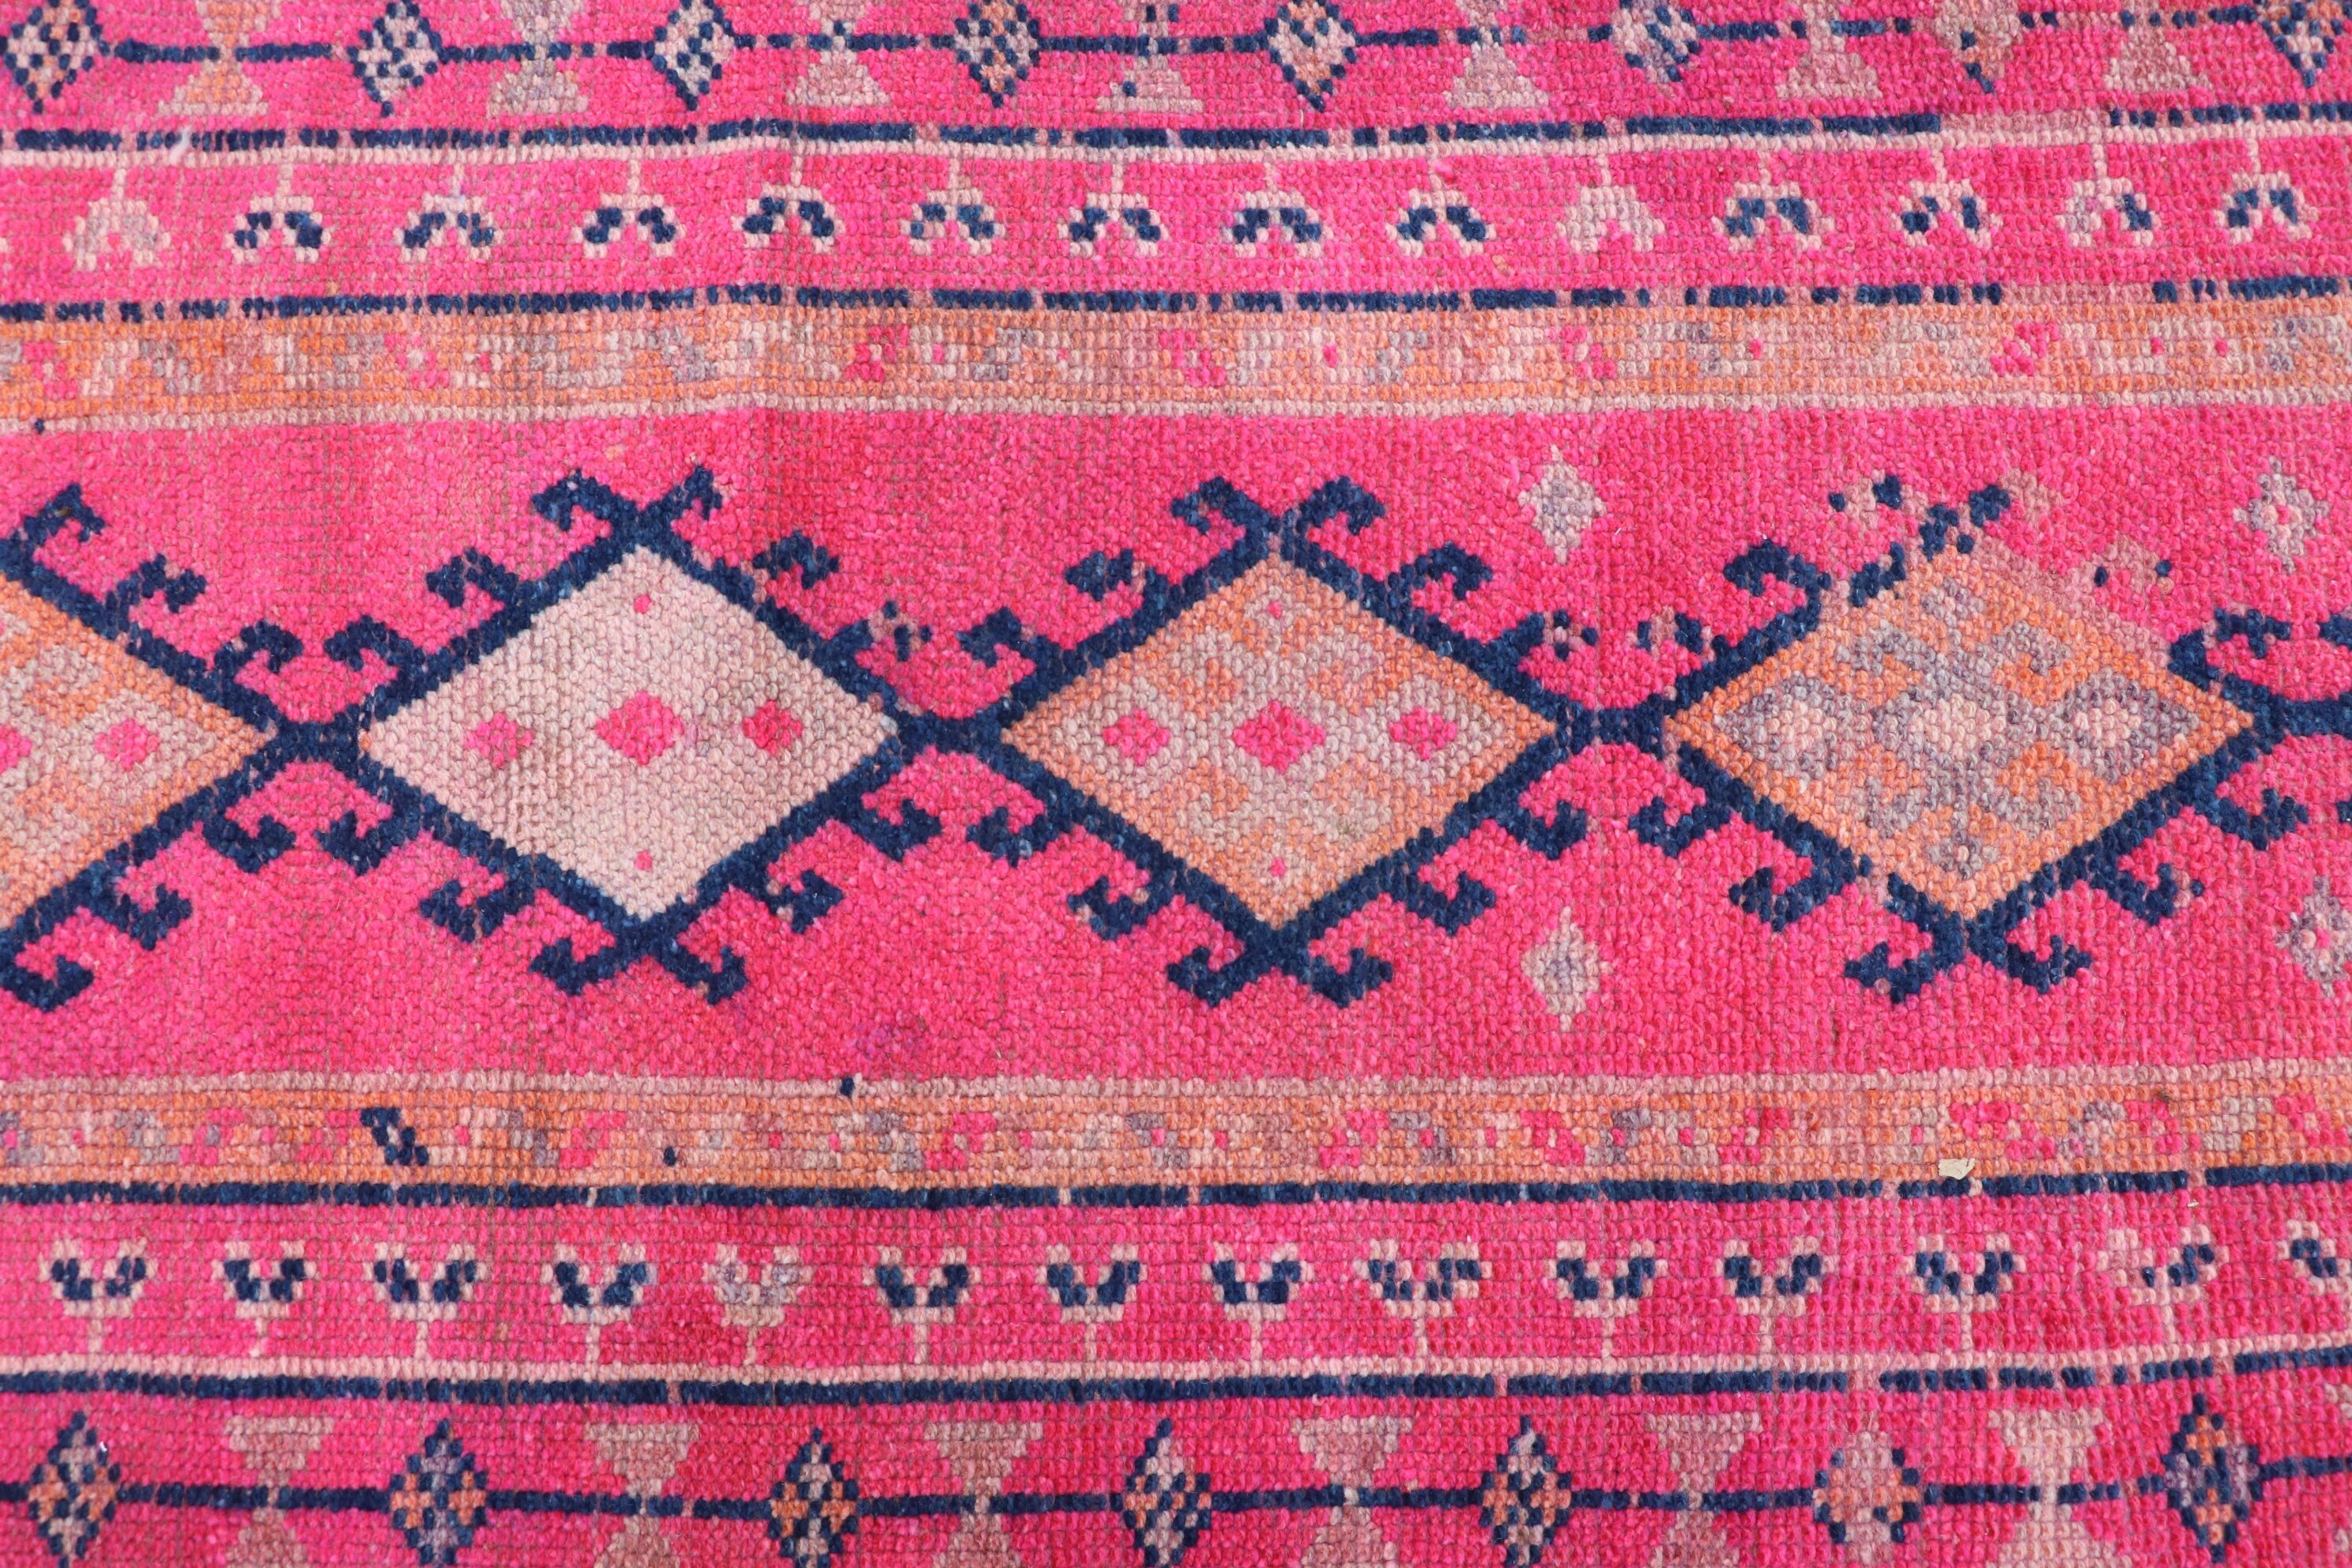 Rugs for Corridor, Kitchen Rug, Cool Rug, 2.7x13 ft Runner Rug, Corridor Rugs, Vintage Rugs, Tribal Rugs, Turkish Rug, Pink Cool Rugs